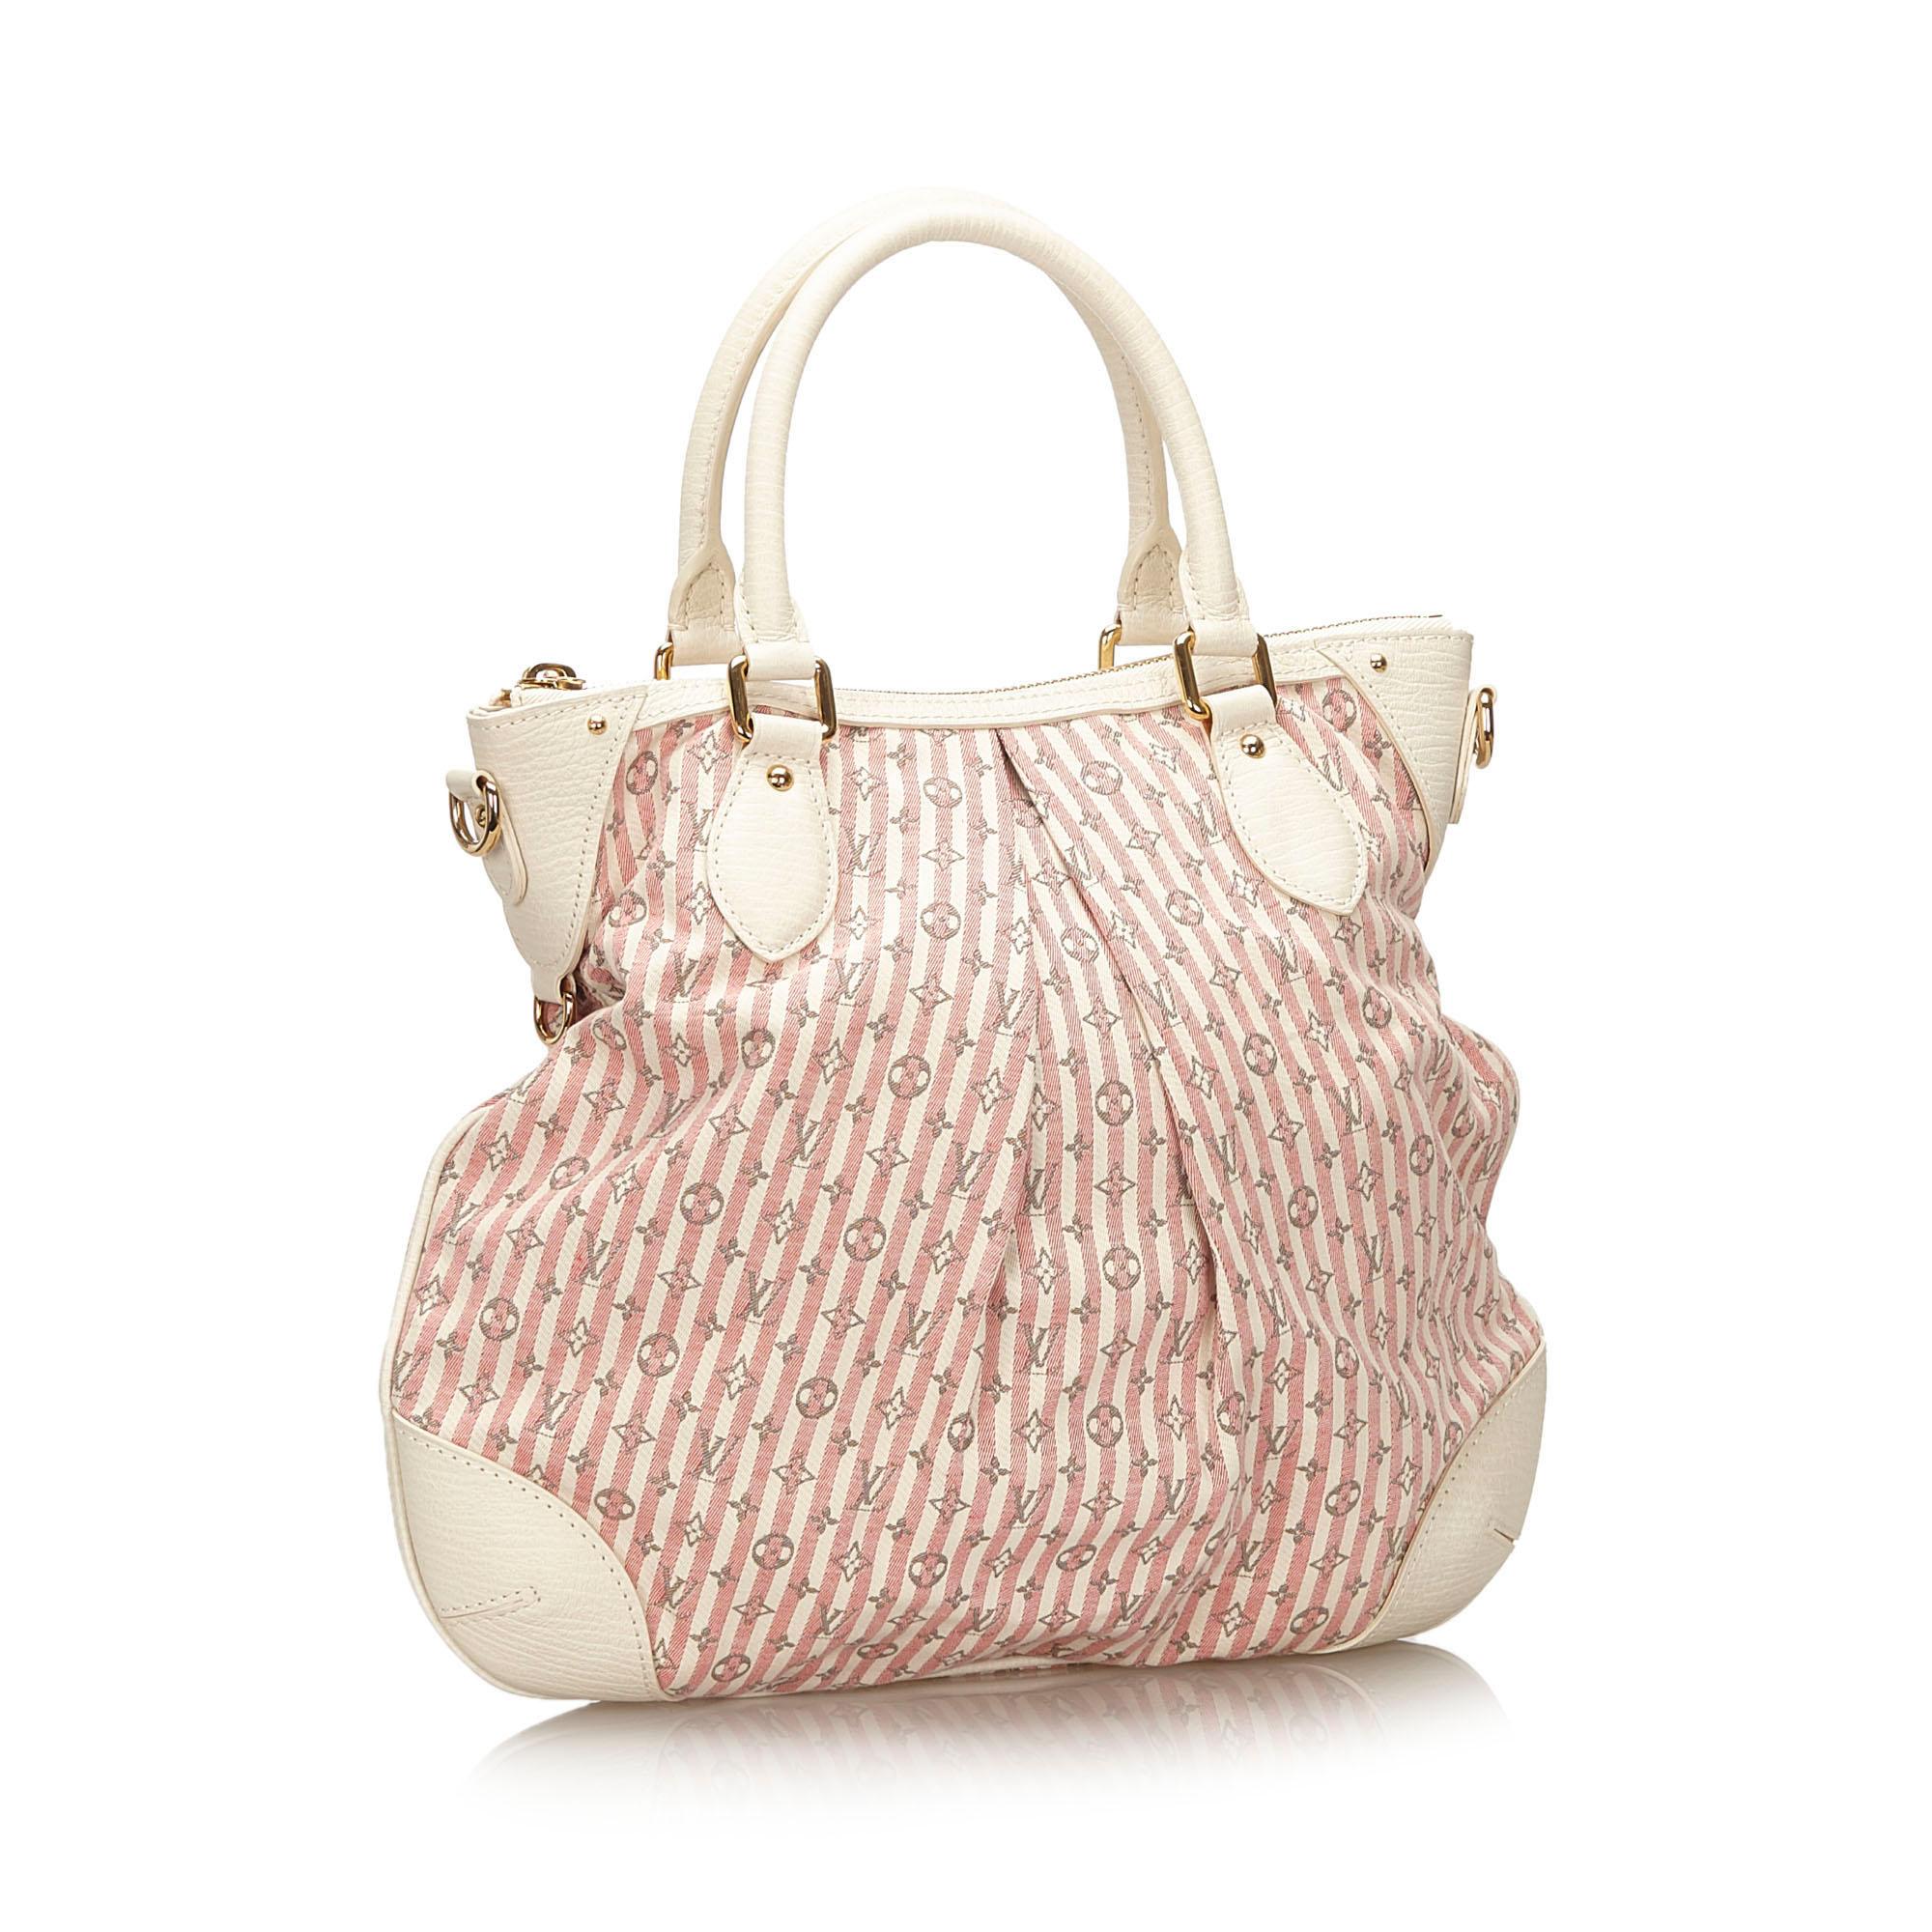 The Croisette Marina PM features a mini lin body with leather trim, rolled leather handles, a detachable flat leather strap, a top zip closure, and interior slip pockets. It carries as AB condition rating.

Inclusions: 
Dust Bag

Louis Vuitton